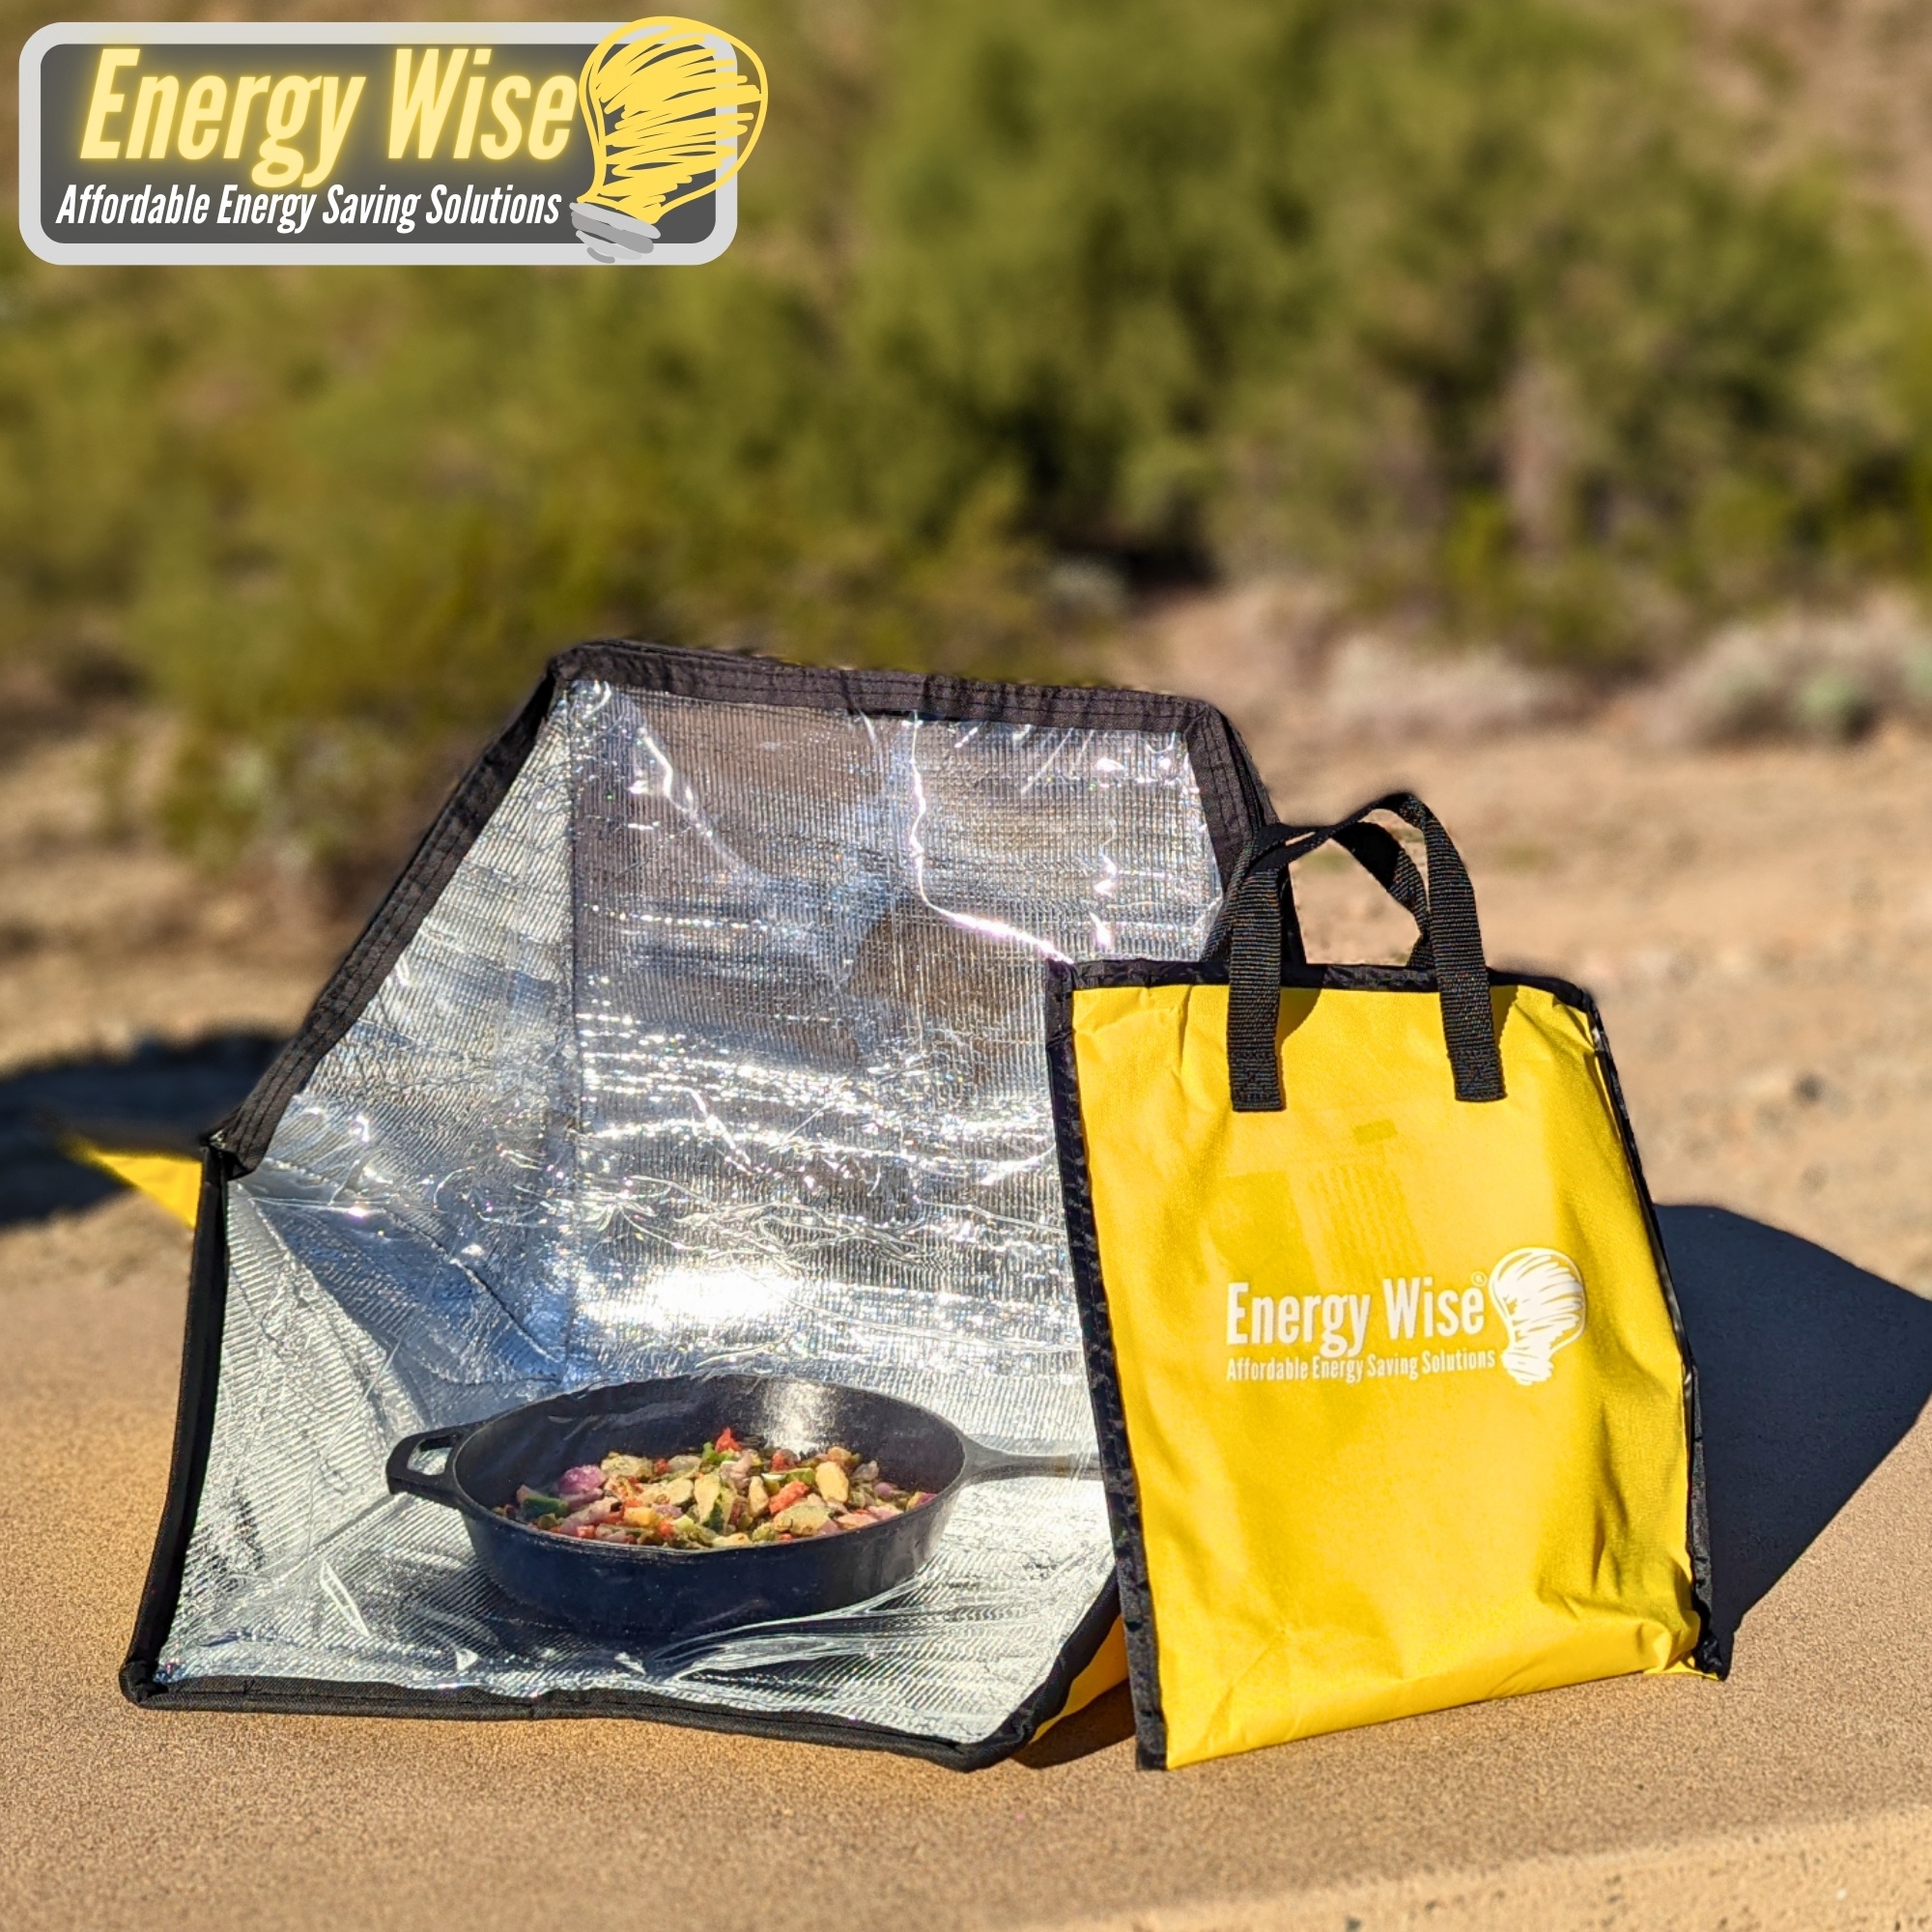 Energy Wise Premium Solar Oven, Portable Outdoor Solar Cooker & Camping Oven, Reinforced & Foldable with Support Rods, Carry Bag & Full Guide On